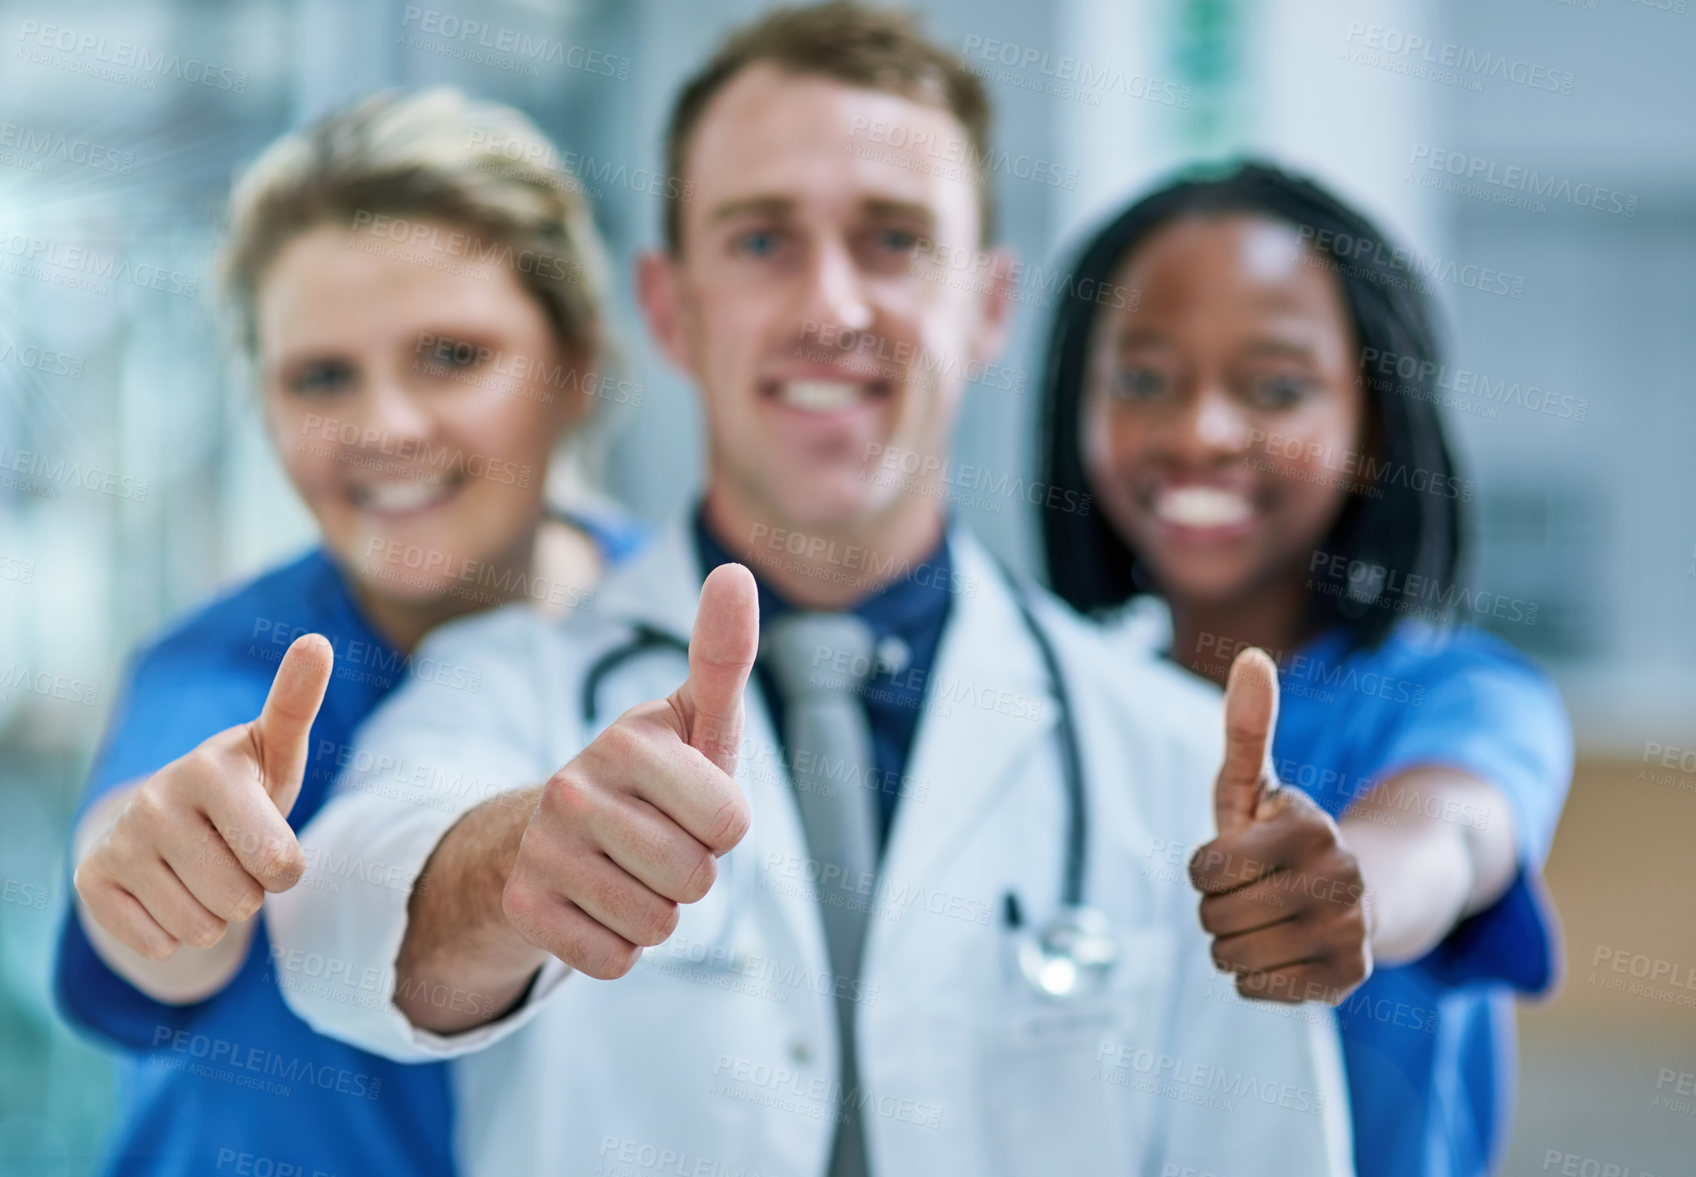 Buy stock photo Portrait of a team of confident young doctors giving thumbs up